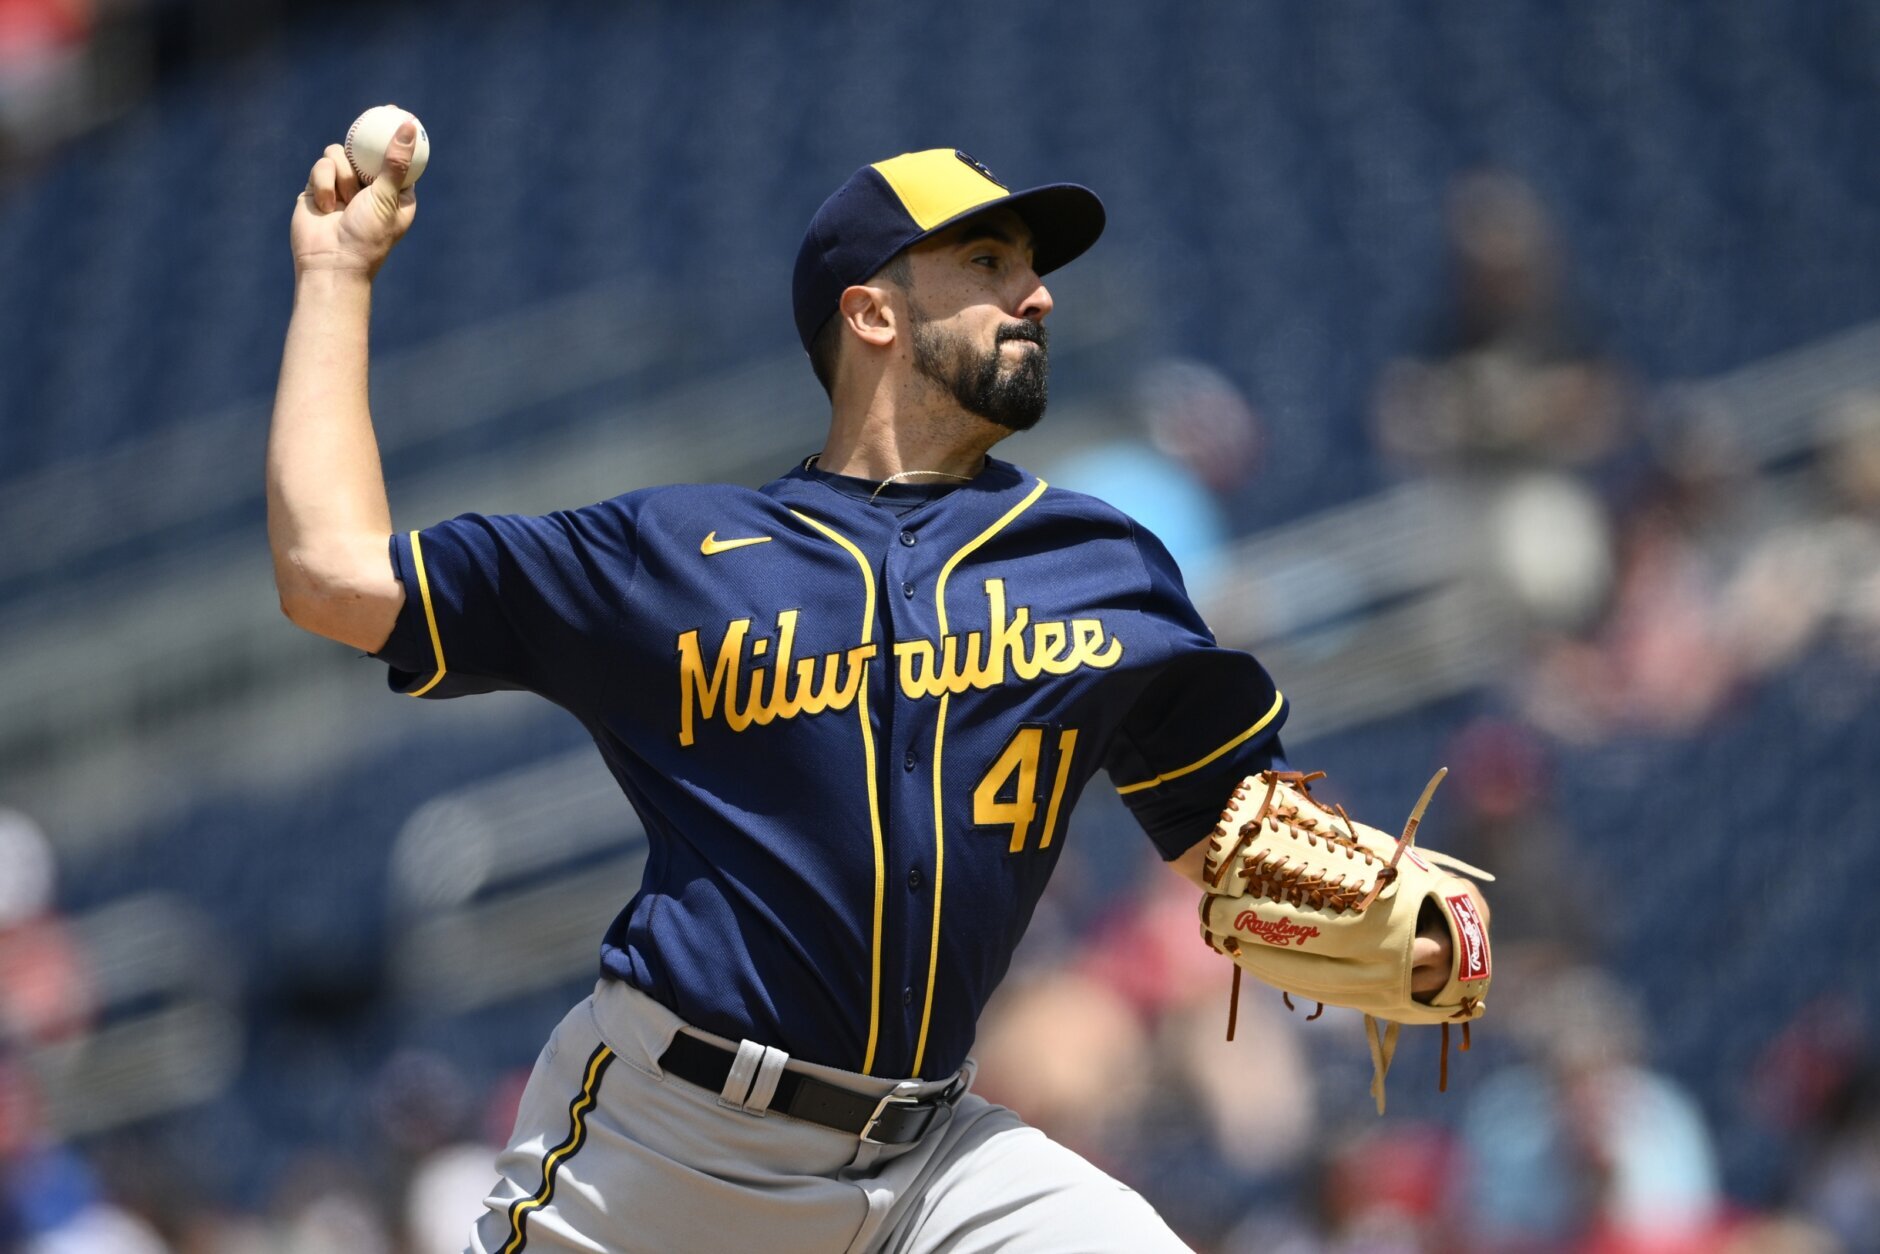 Jason Alexander pitched 4.2 innings of one-run ball to help the Brewers defeat the Nationals.